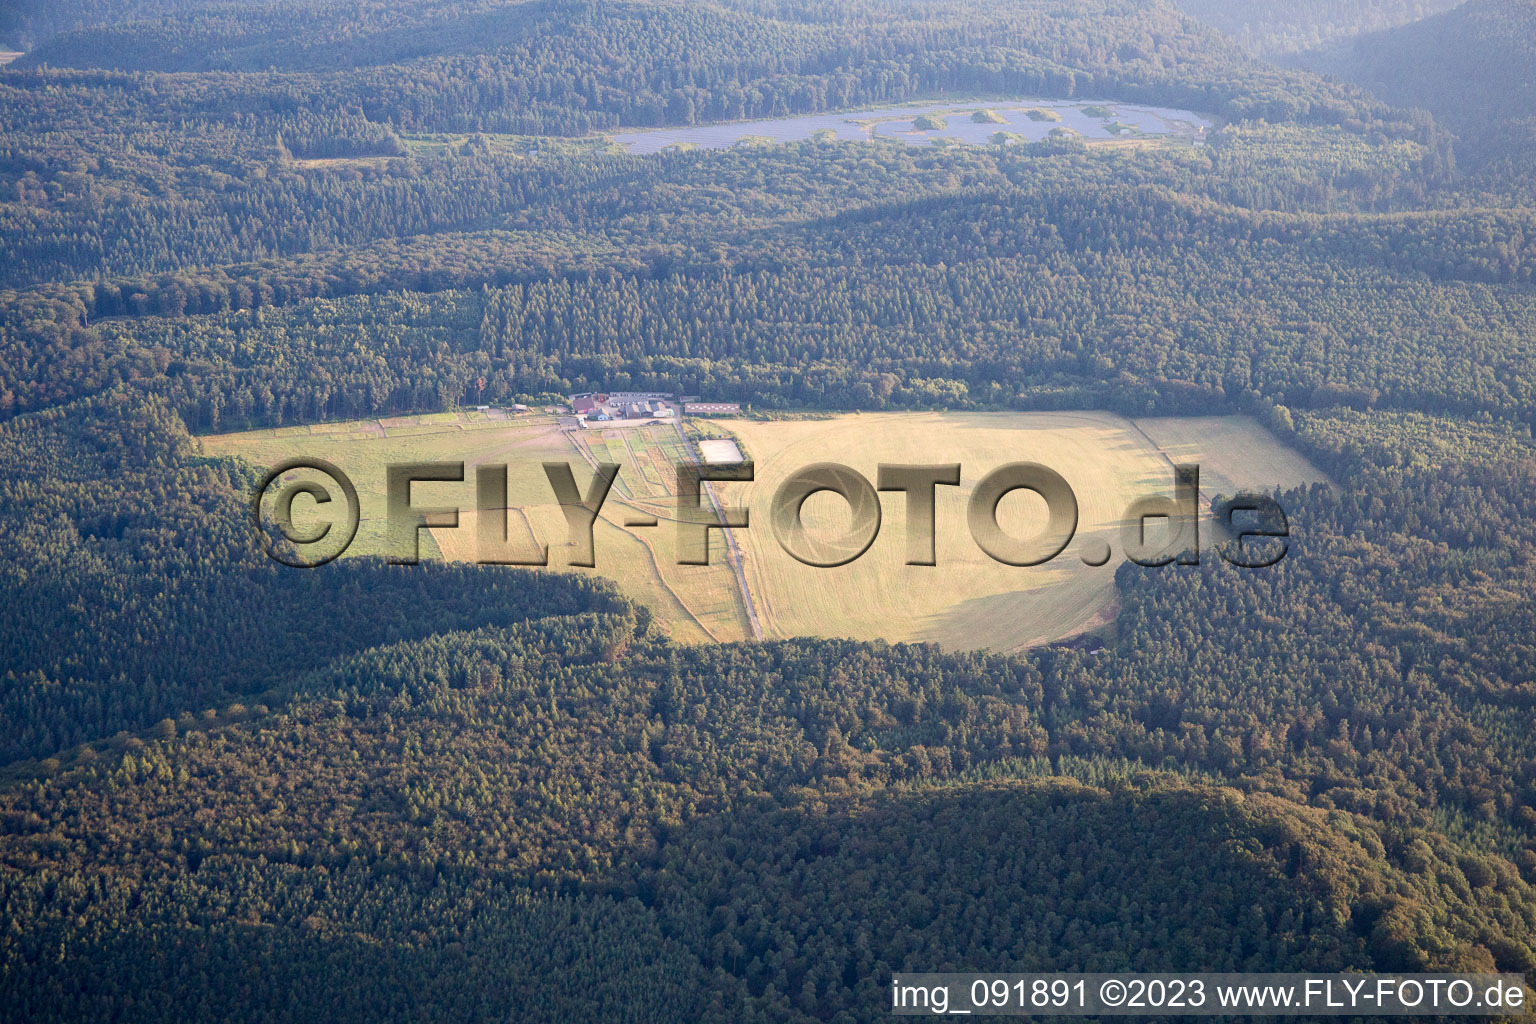 Aerial view of Merzalben in the state Rhineland-Palatinate, Germany